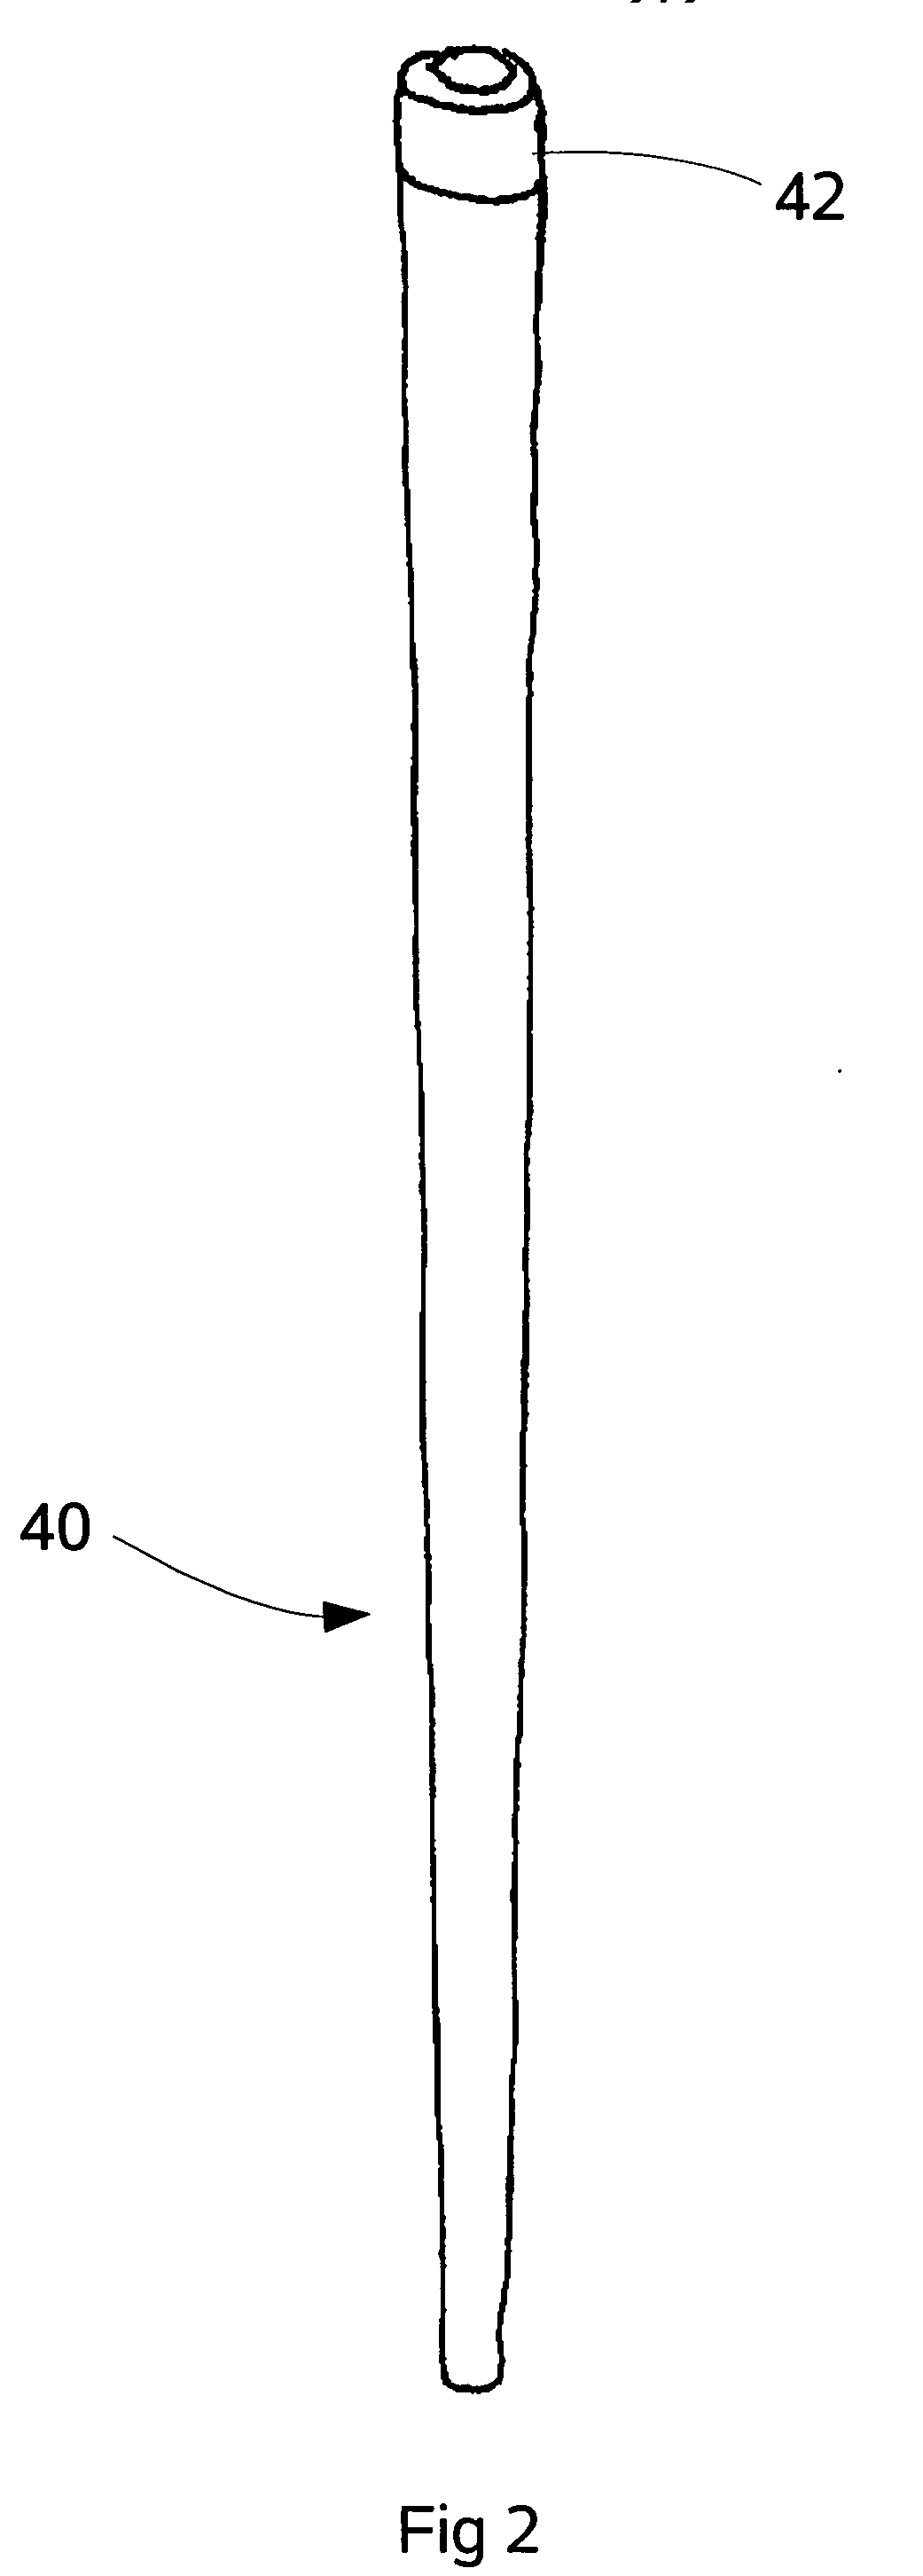 Apparatus and method for teaching golf